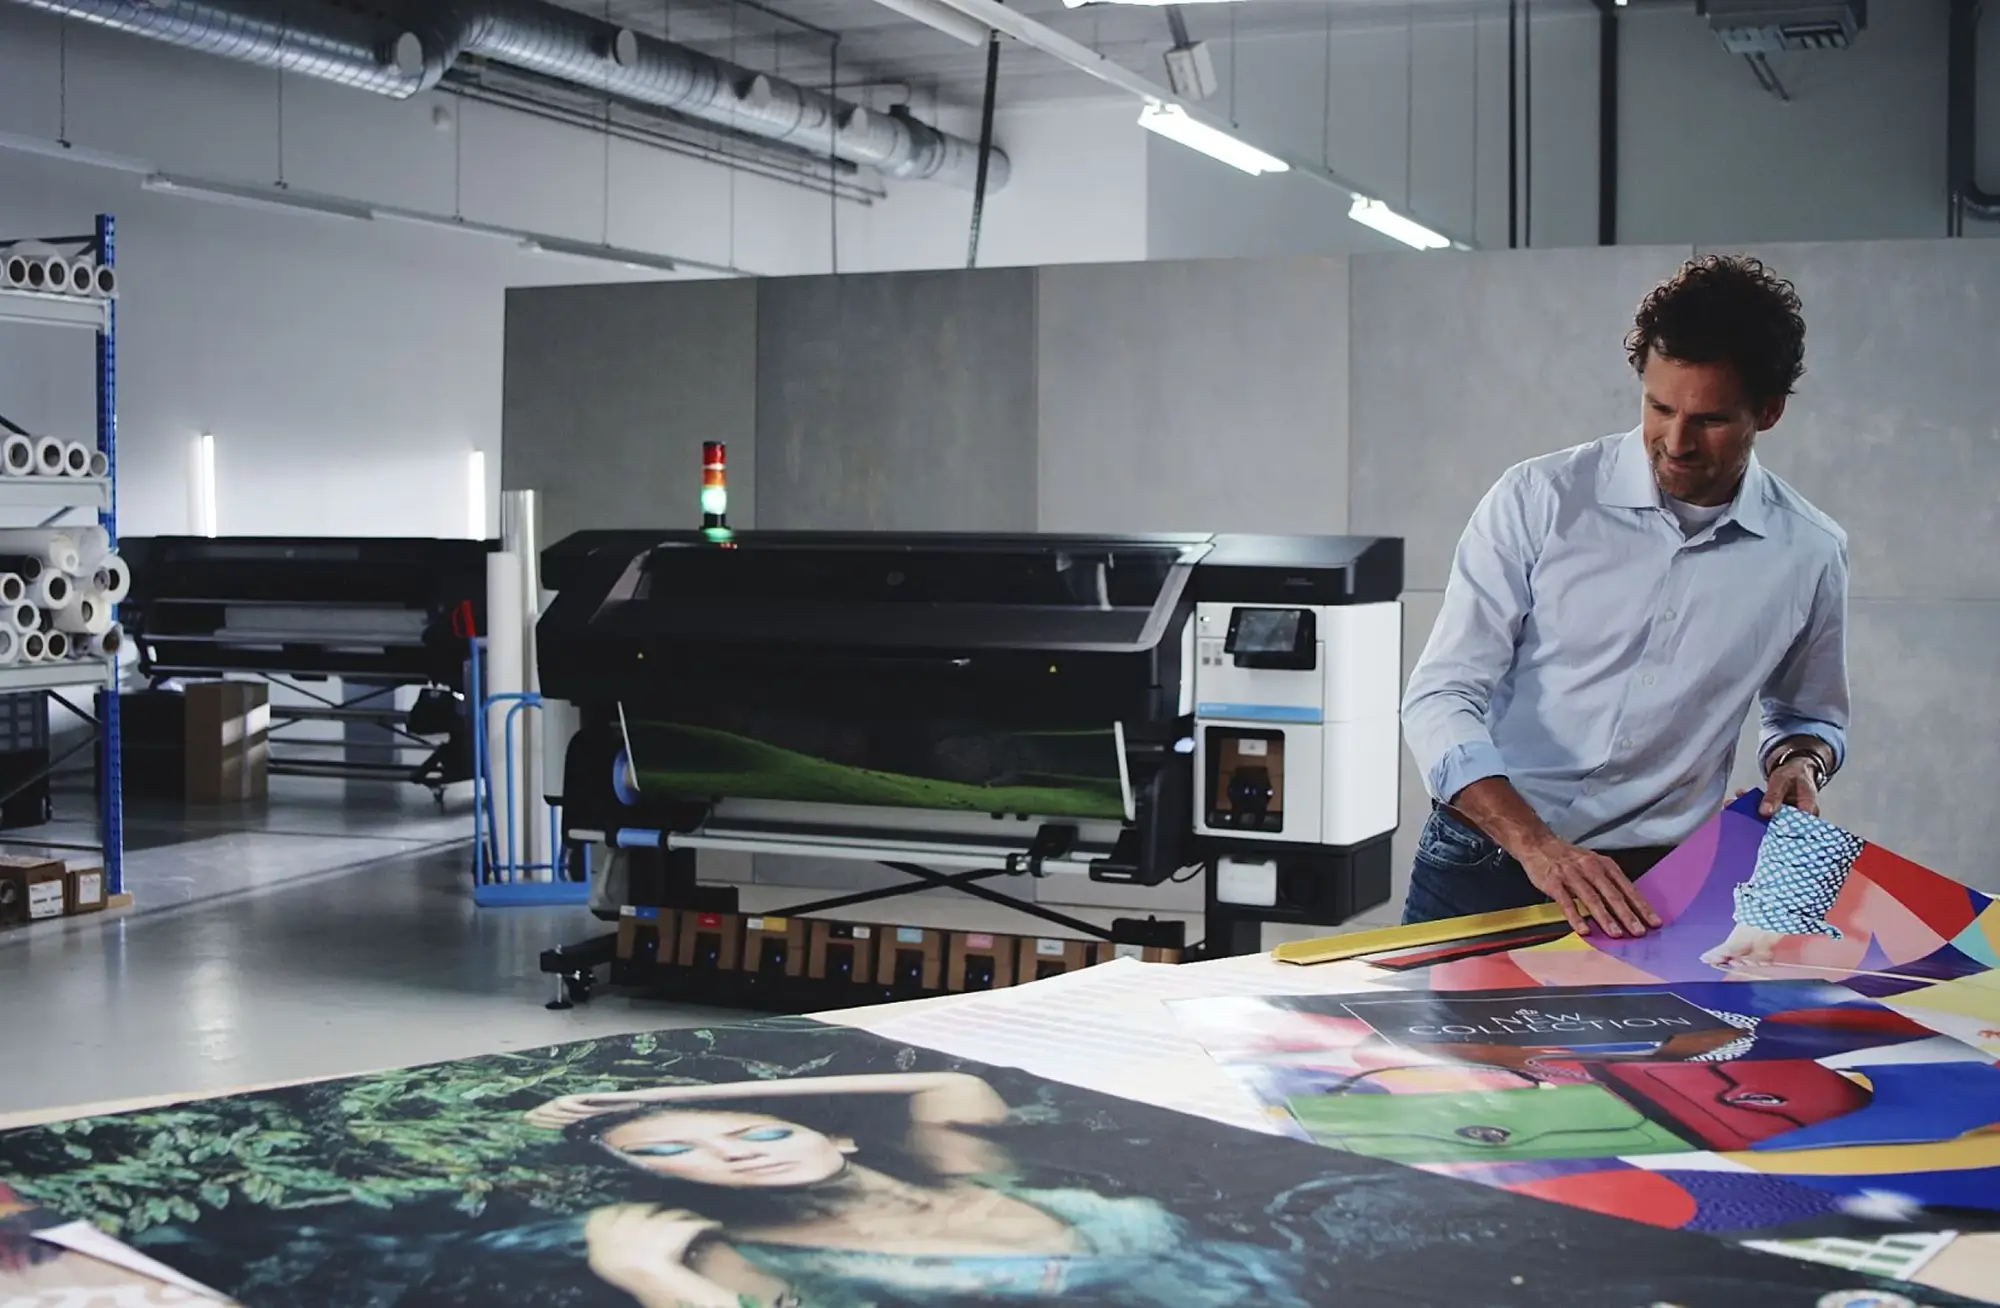 Industrial design of a printer for HP by Nacar Design in Barcelona